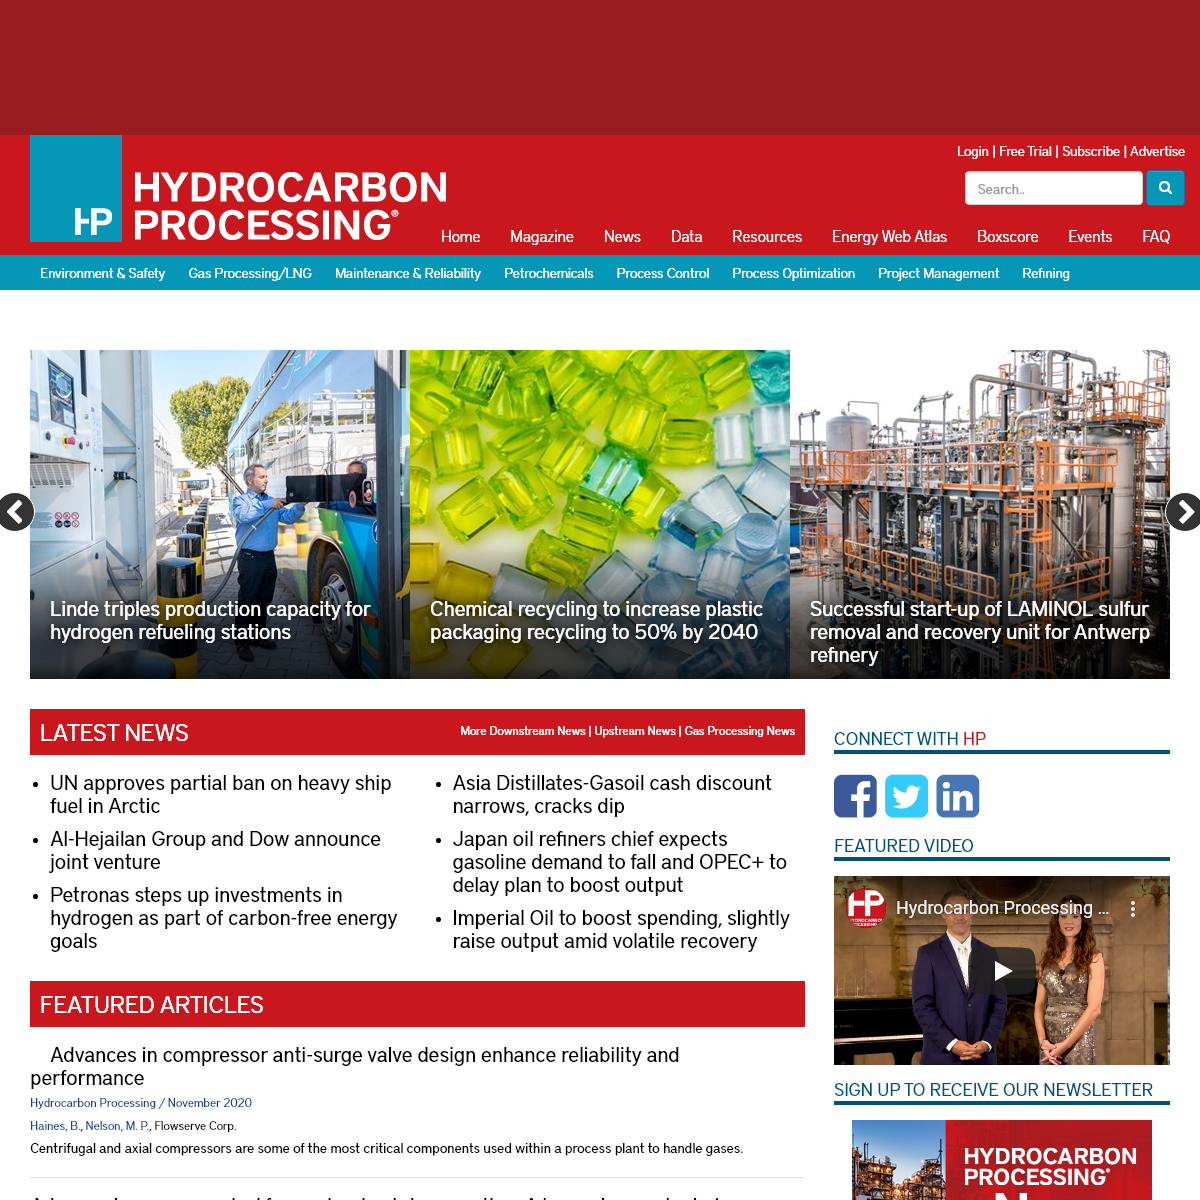 A complete backup of hydrocarbonprocessing.com